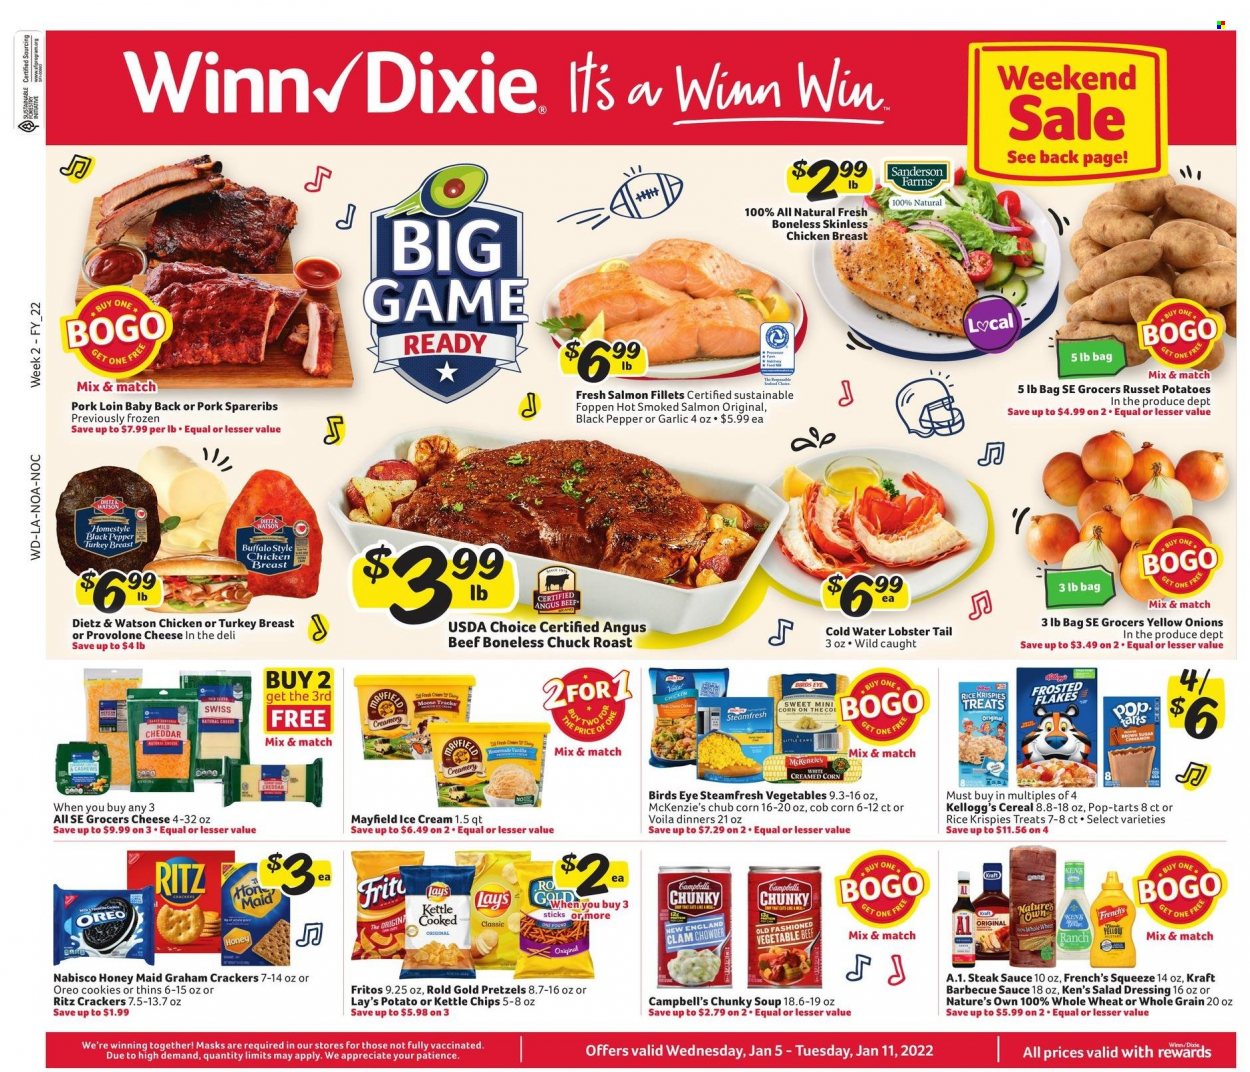 thumbnail - Winn Dixie Flyer - 01/05/2022 - 01/11/2022 - Sales products - pretzels, tart, corn, garlic, russet potatoes, potatoes, lobster, salmon, salmon fillet, smoked salmon, lobster tail, Campbell's, soup, sauce, Bird's Eye, Kraft®, Dietz & Watson, Provolone, Oreo, ice cream, cookies, graham crackers, crackers, Kellogg's, Pop-Tarts, RITZ, Fritos, Lay’s, Thins, clam chowder, cereals, Rice Krispies, Frosted Flakes, Honey Maid, black pepper, BBQ sauce, salad dressing, steak sauce, dressing, turkey breast, beef meat, steak, chuck roast, pork loin, pork meat, pork ribs, pork spare ribs, pork back ribs, Nature's Own. Page 1.